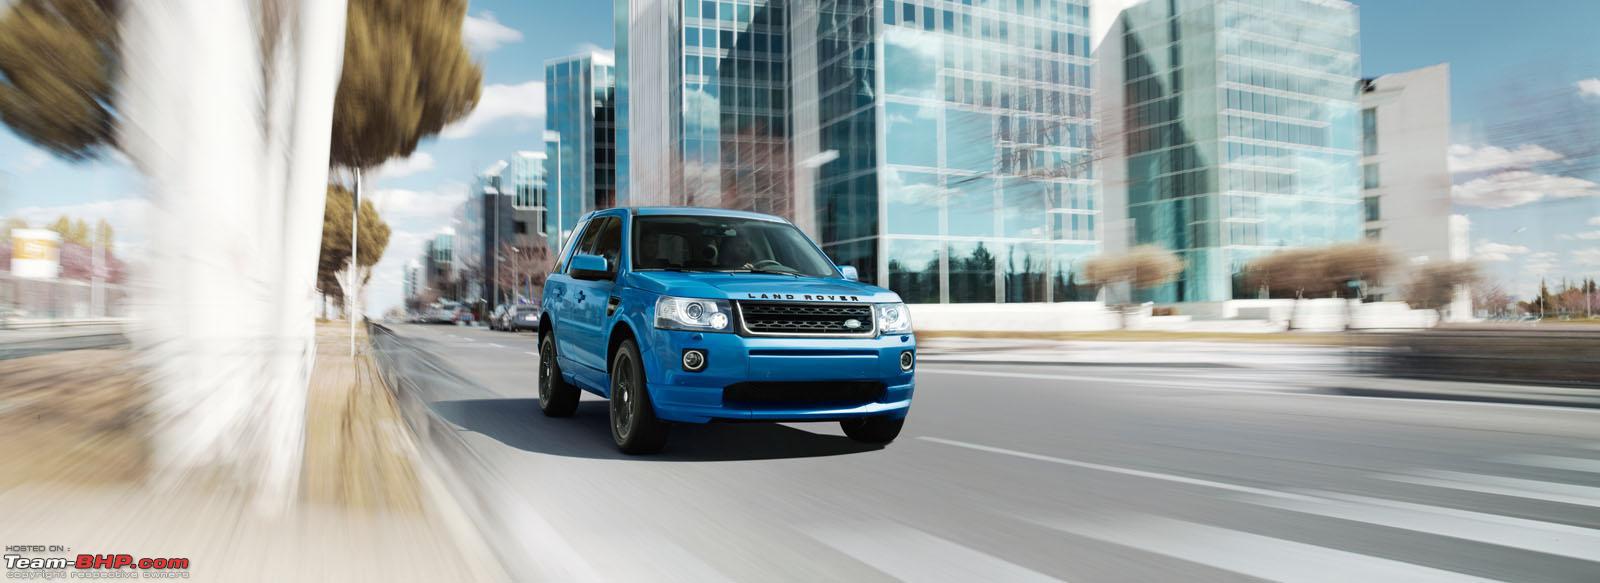 Land Rover launches improved Freelander 2 @ 38.67 lakhs - Team-BHP